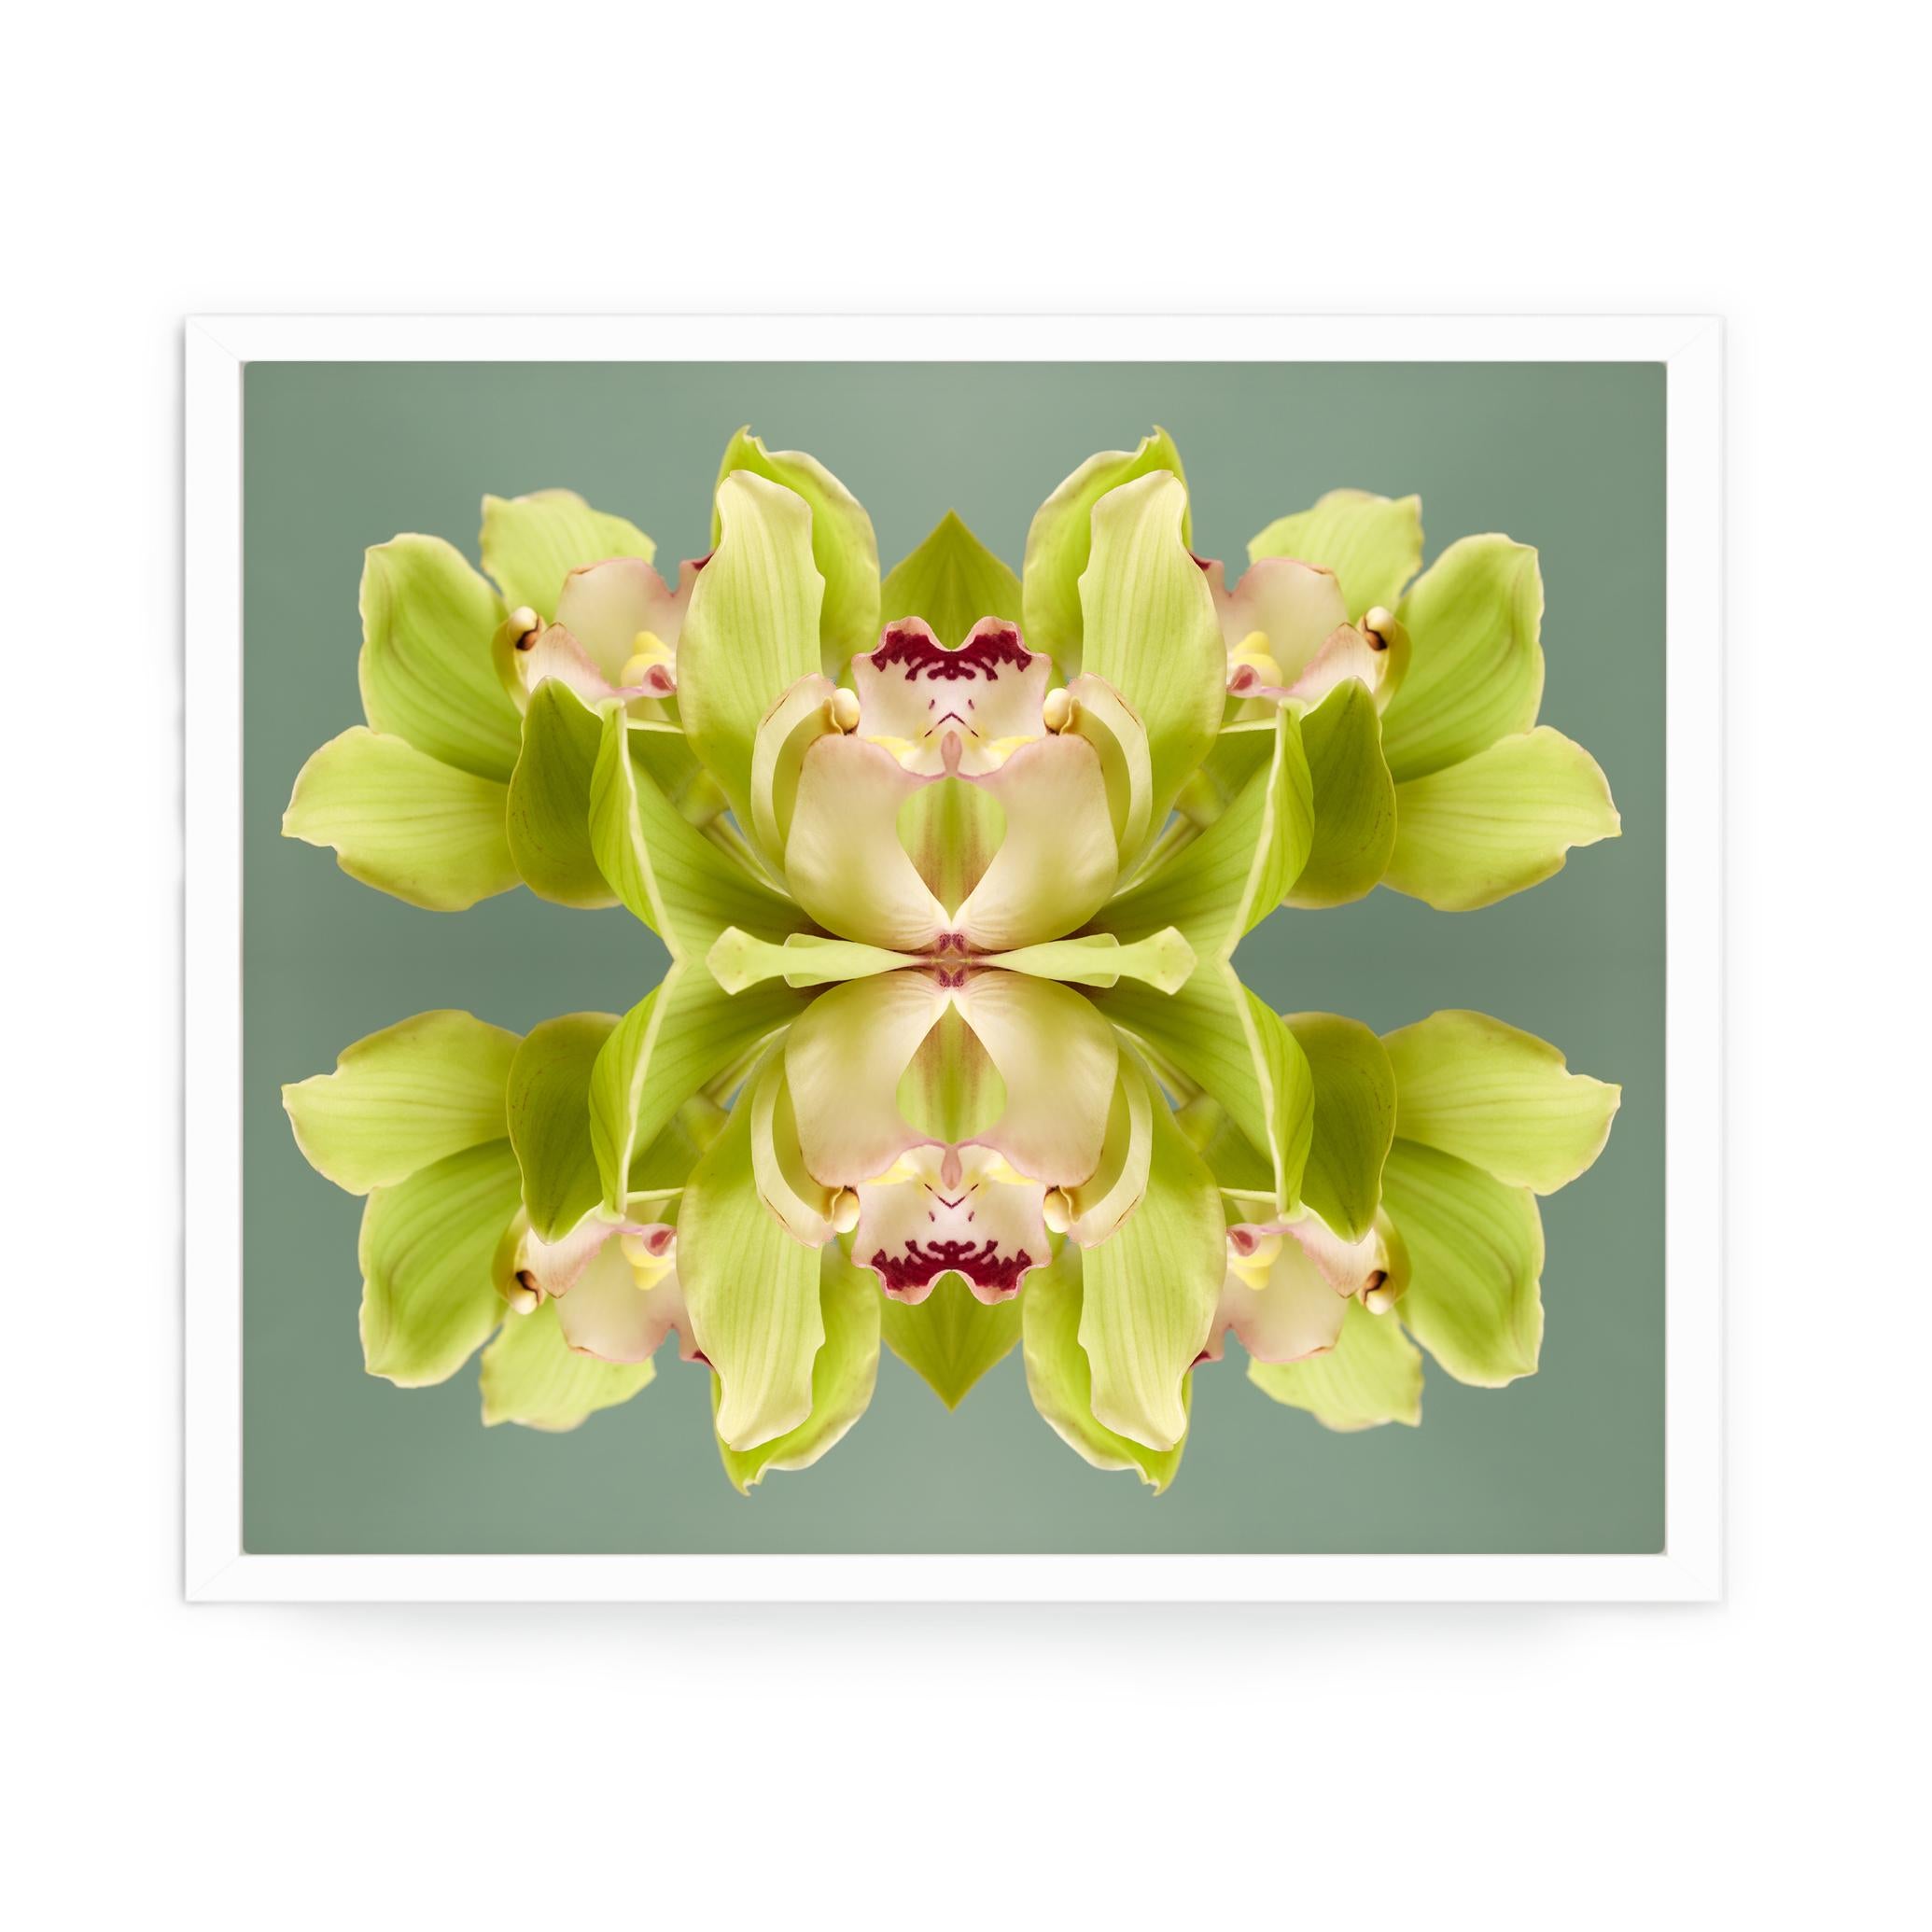 This print features the playful relationship between natural forms and botanicals. In this image Erin uses the natural composition of the lime green orchids, and her own collage work, to create a hypnotic mandala with the floral. Some describe it as